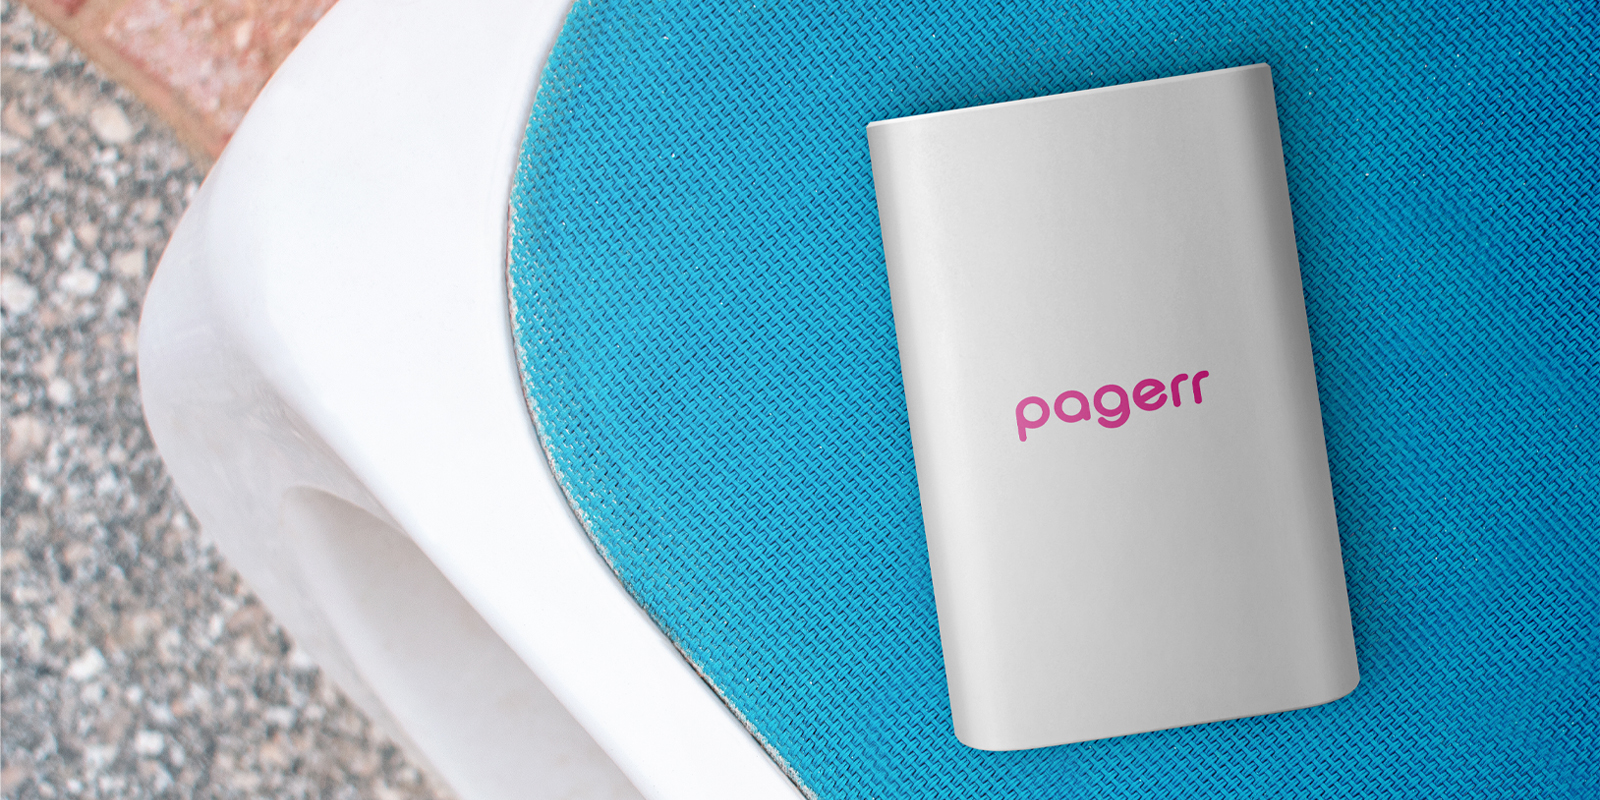 Chargers & power banks in Seville - Print with Pagerr